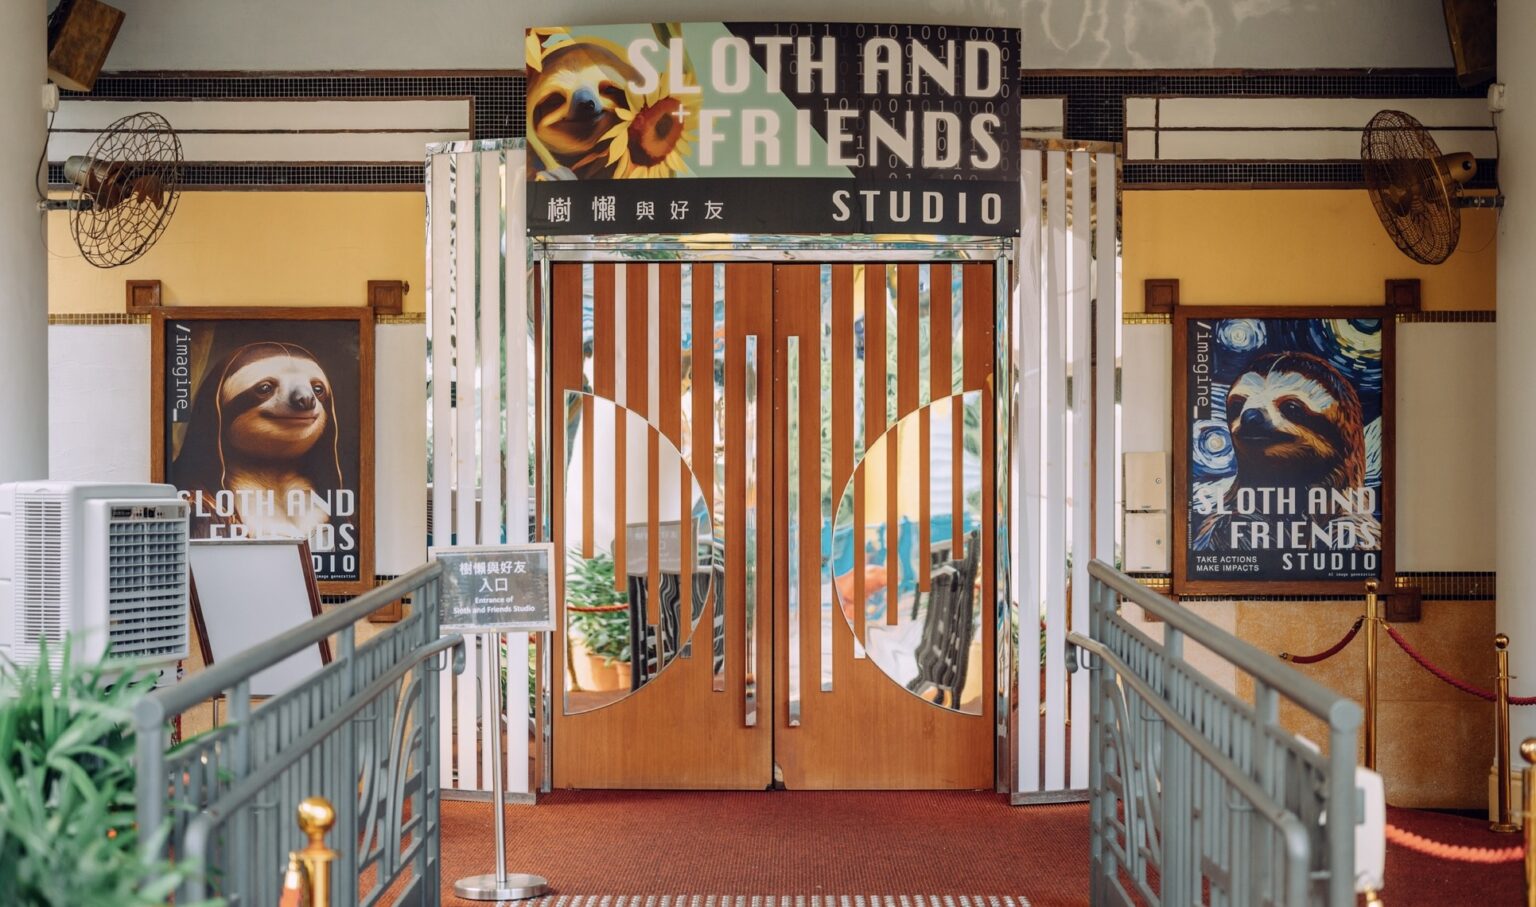 entrance to ocean park hong kong's new sloth studio and friends exhibit